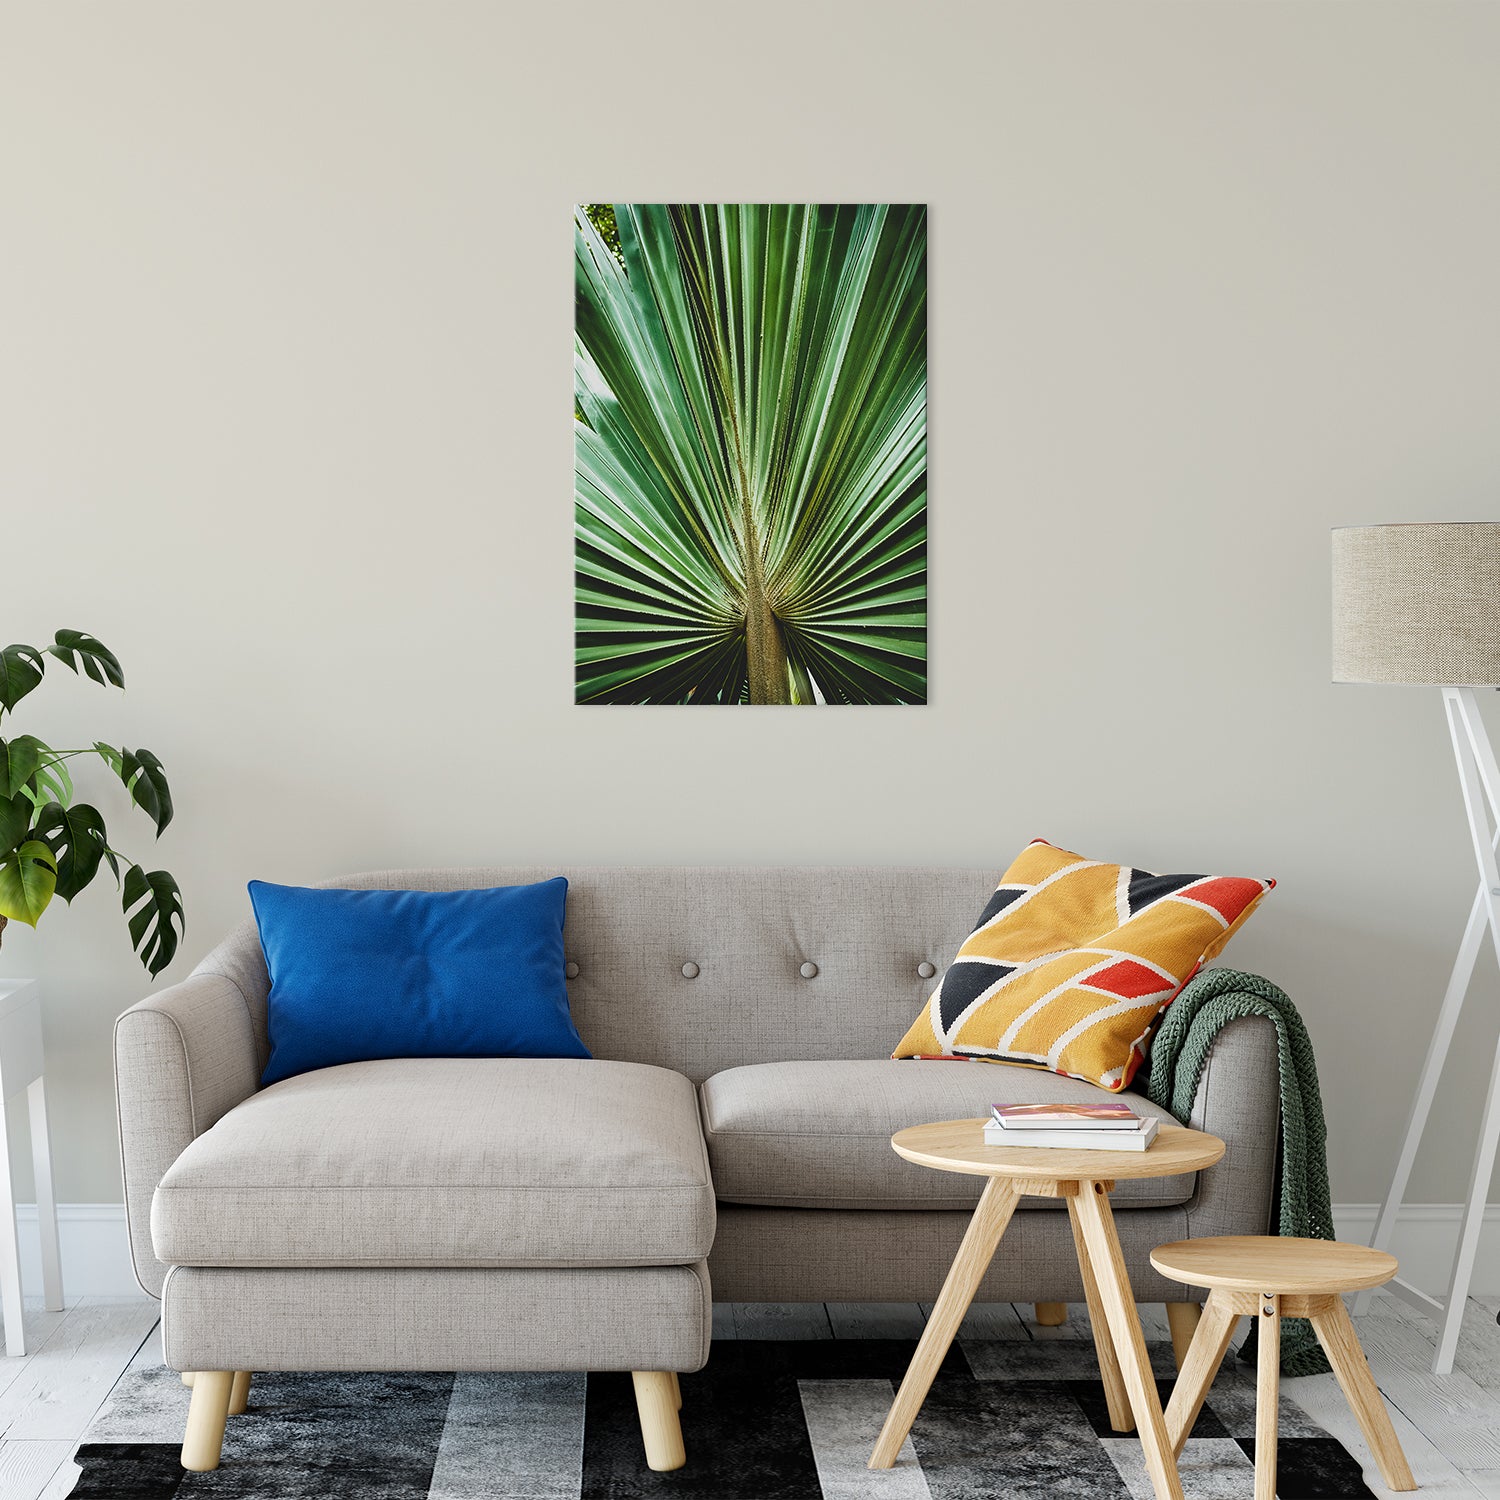 Canvas Wall Art Tropical: Aged & Colorized Wide Palm Leaves 2 Nature / Botanical Photo Fine Art Canvas Wall Art Prints 24" x 36" - PIPAFINEART